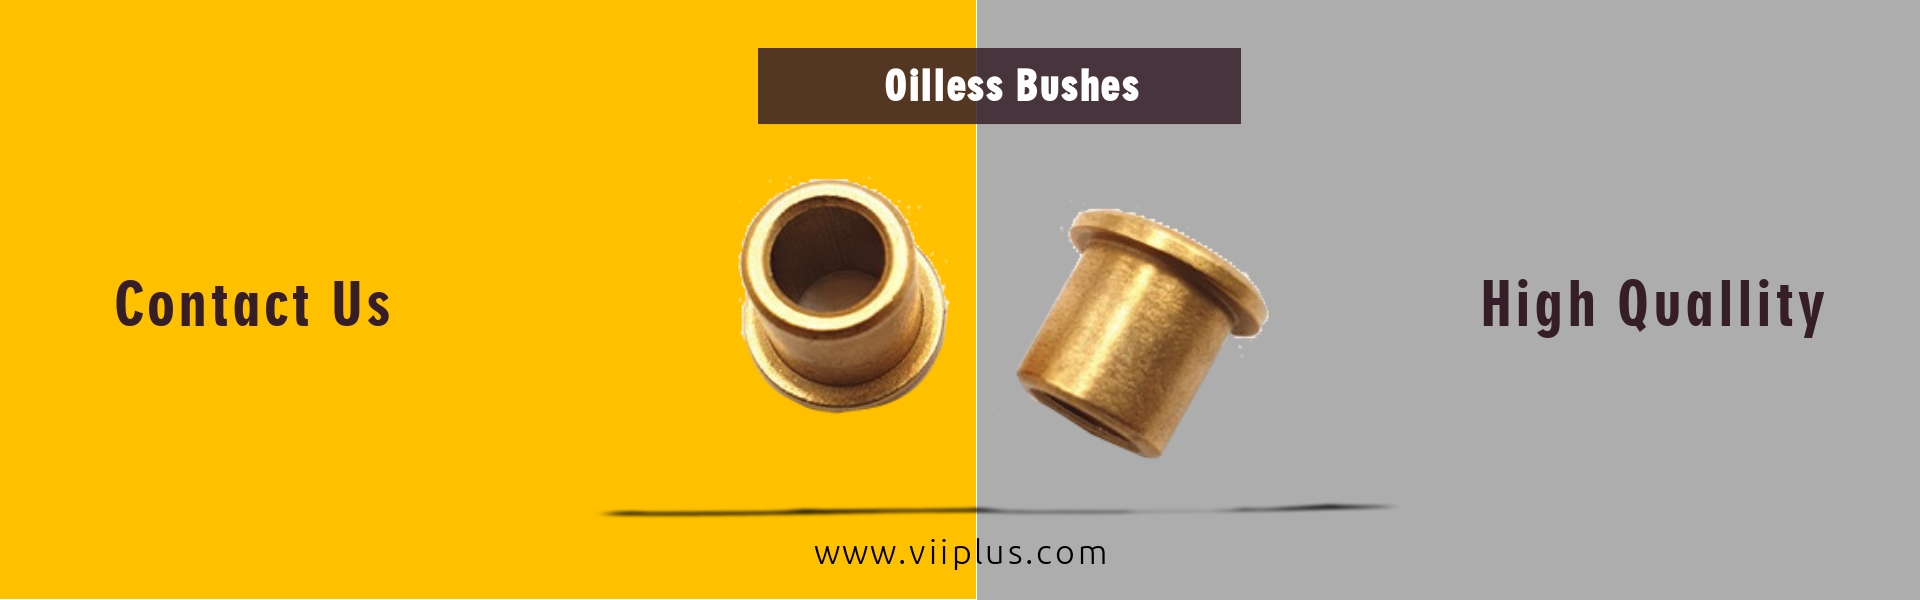 oilless bushes 